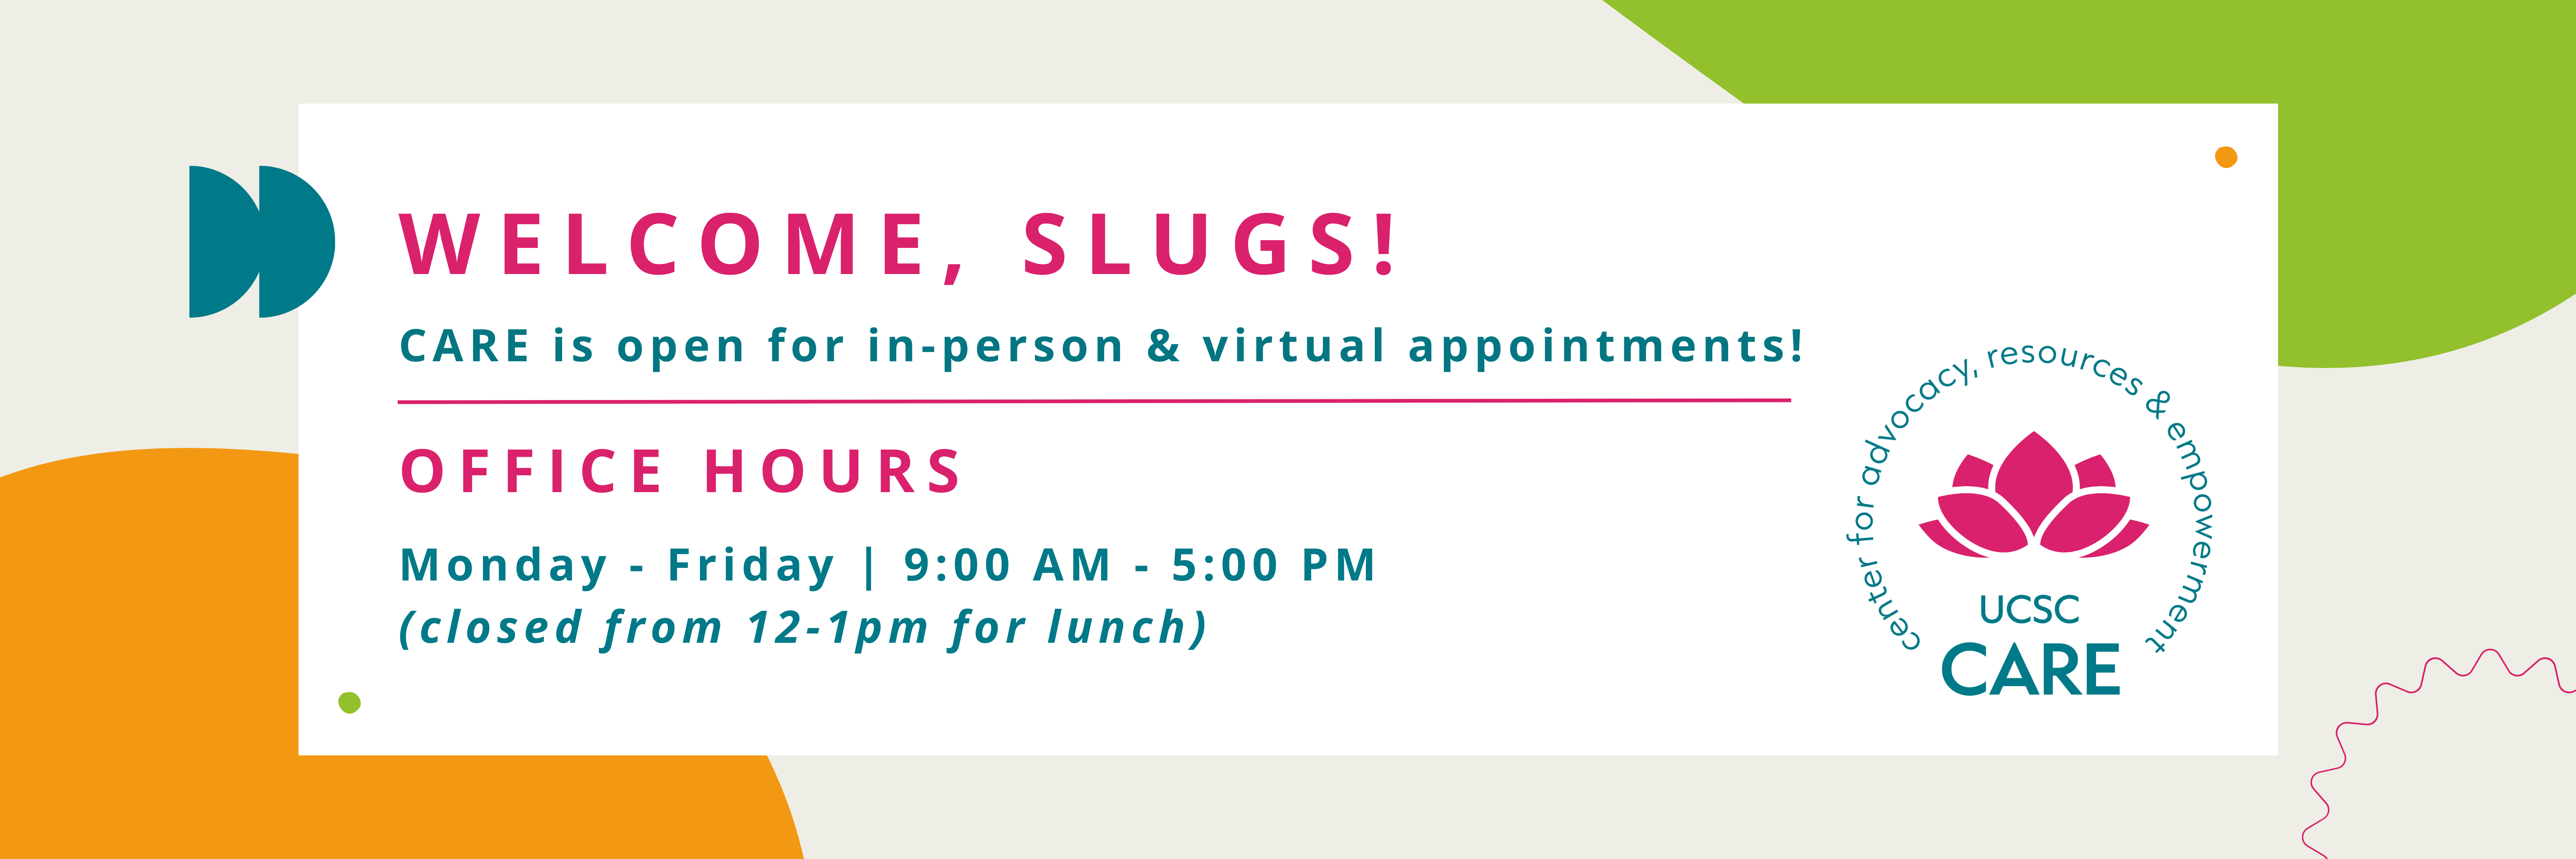 Welcome, Slugs! CARE is open for in-person and virtual appointments! Office Hours: Monday through Friday, 9 AM to 4PM (closed from 12 to 1PM for lunch)